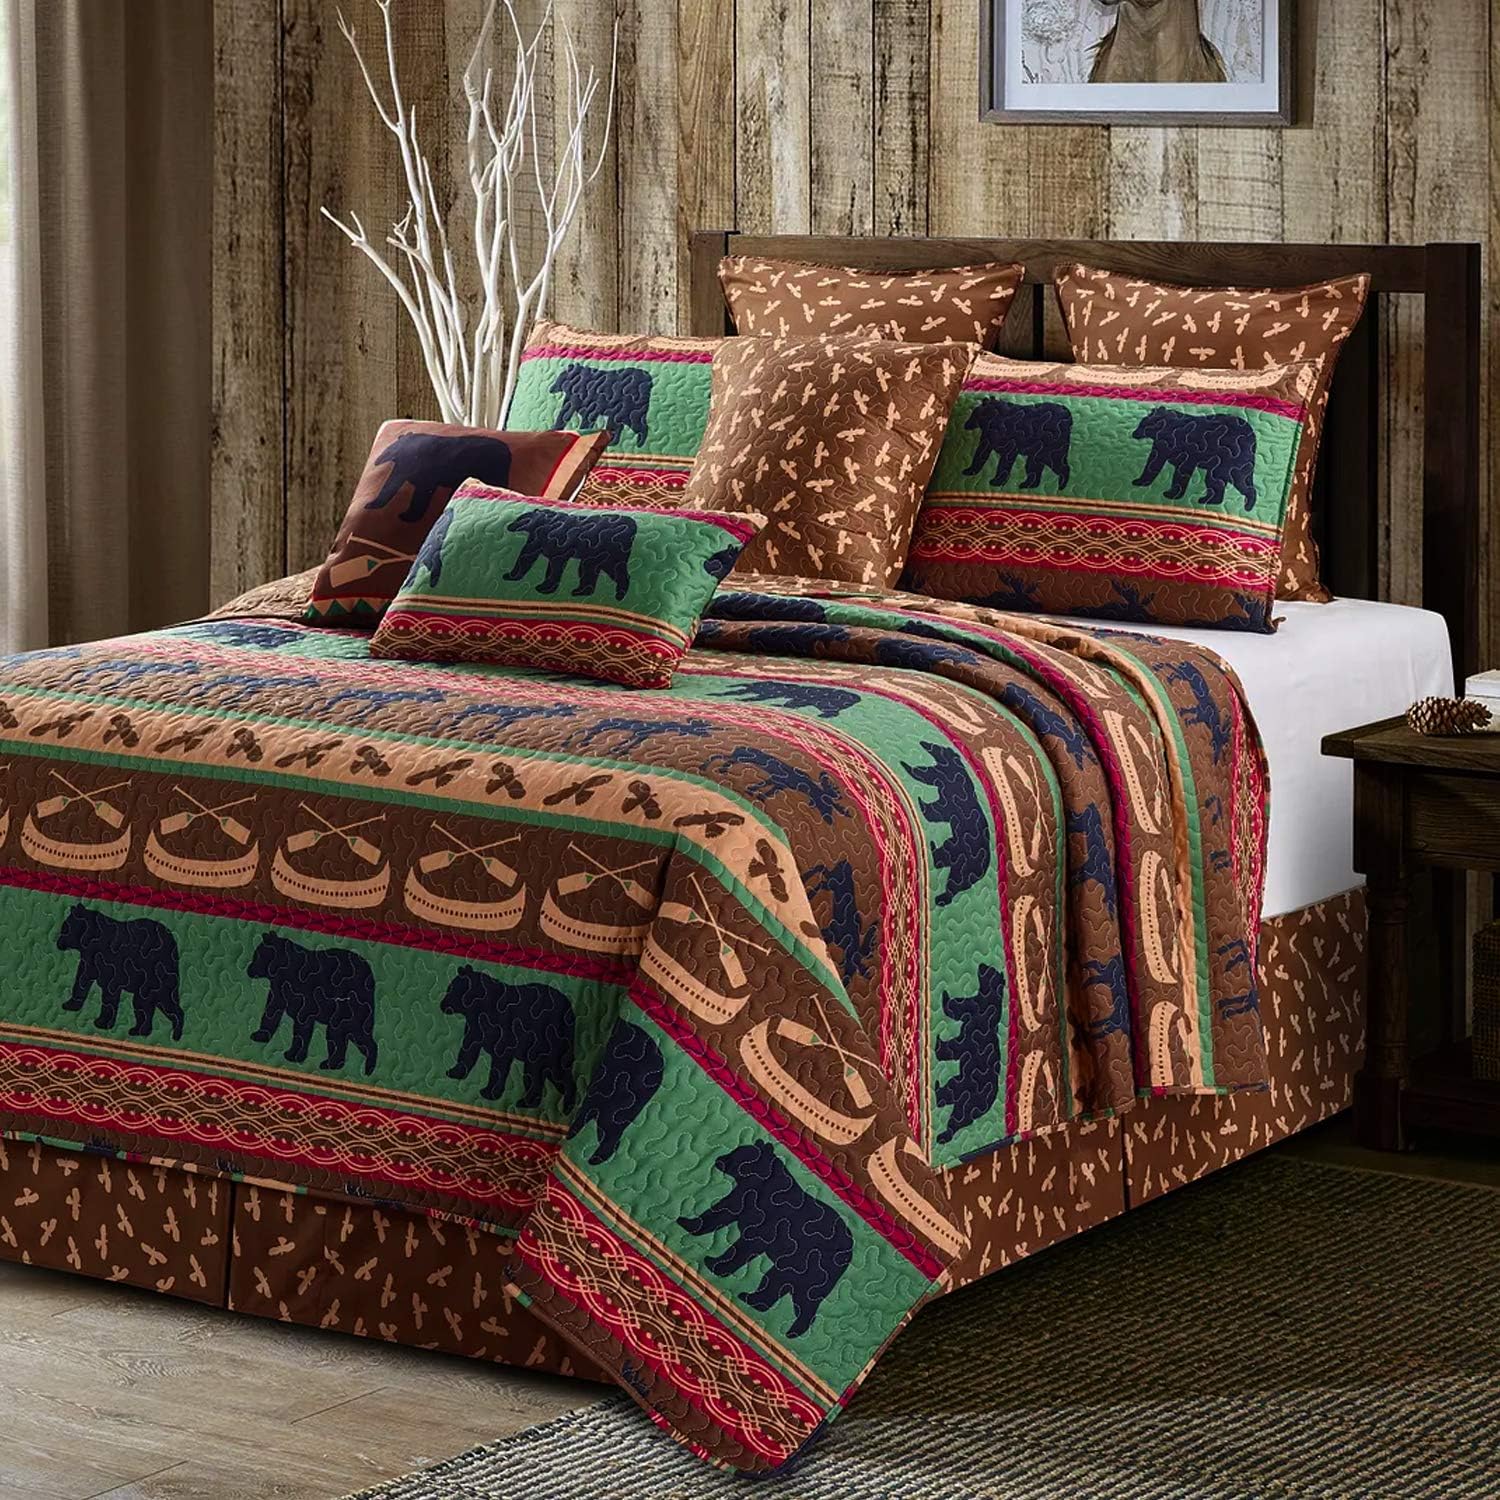 Virah Bella 3 Piece King Cabin Quilt Bedding Set - Lodge Preserve - Rustic Wildlife Country Reversible Camping Comforter with Decorative Pillow Shams, Brown/Green